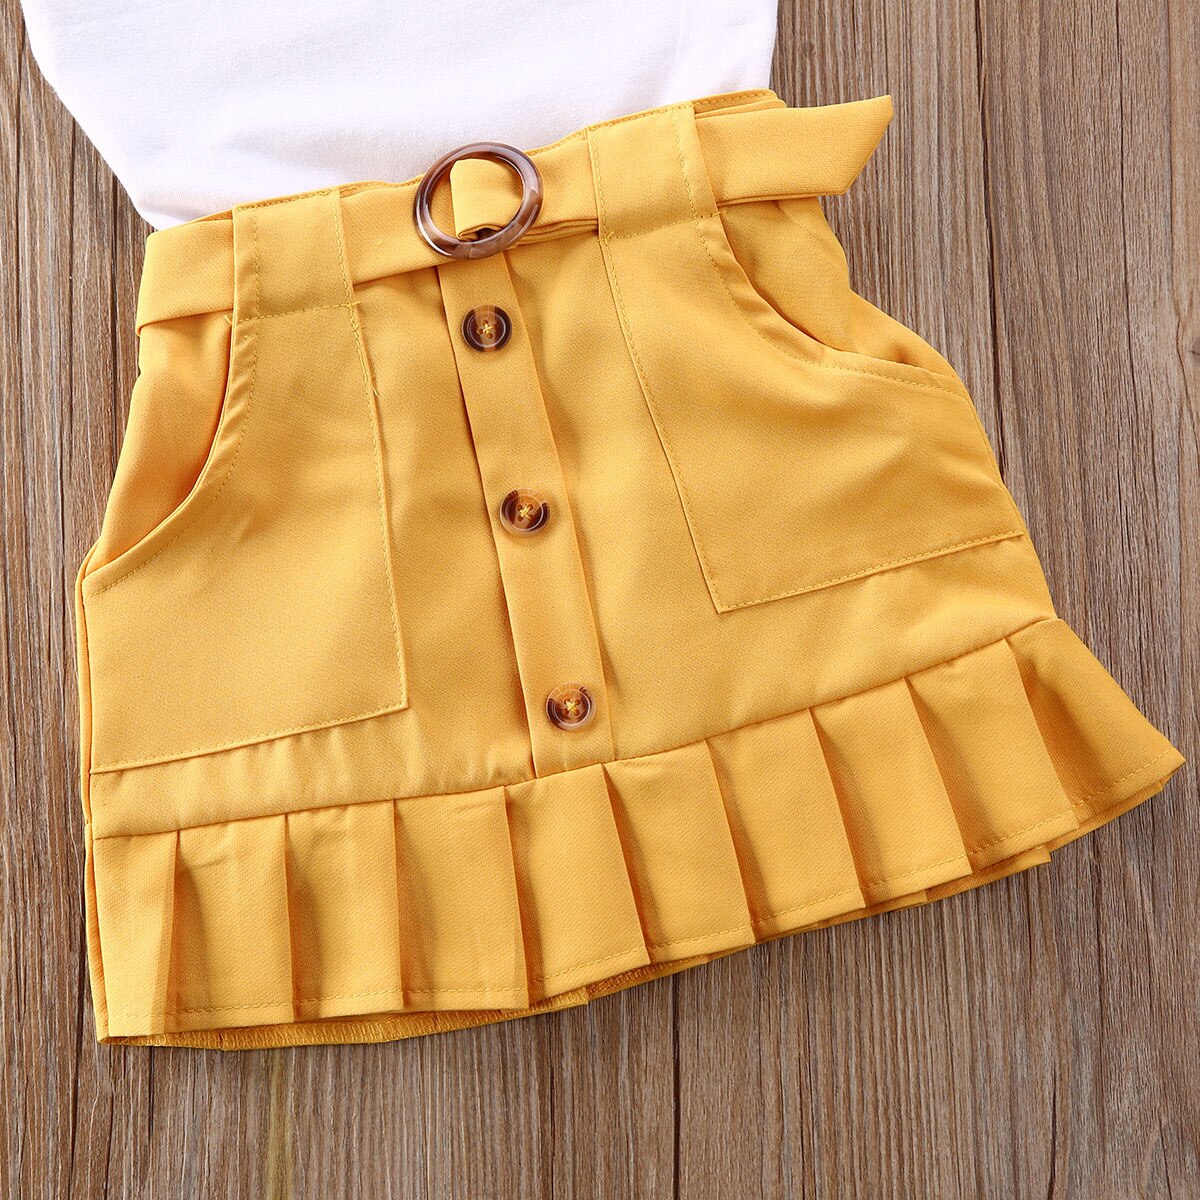 0-5Y-Fashion-Toddler-Kids-Baby-Girls-Clothes-Sets-Solid-Sleeveless-Bodysuit-Tops-Yellow-Pleated-Skirts-3